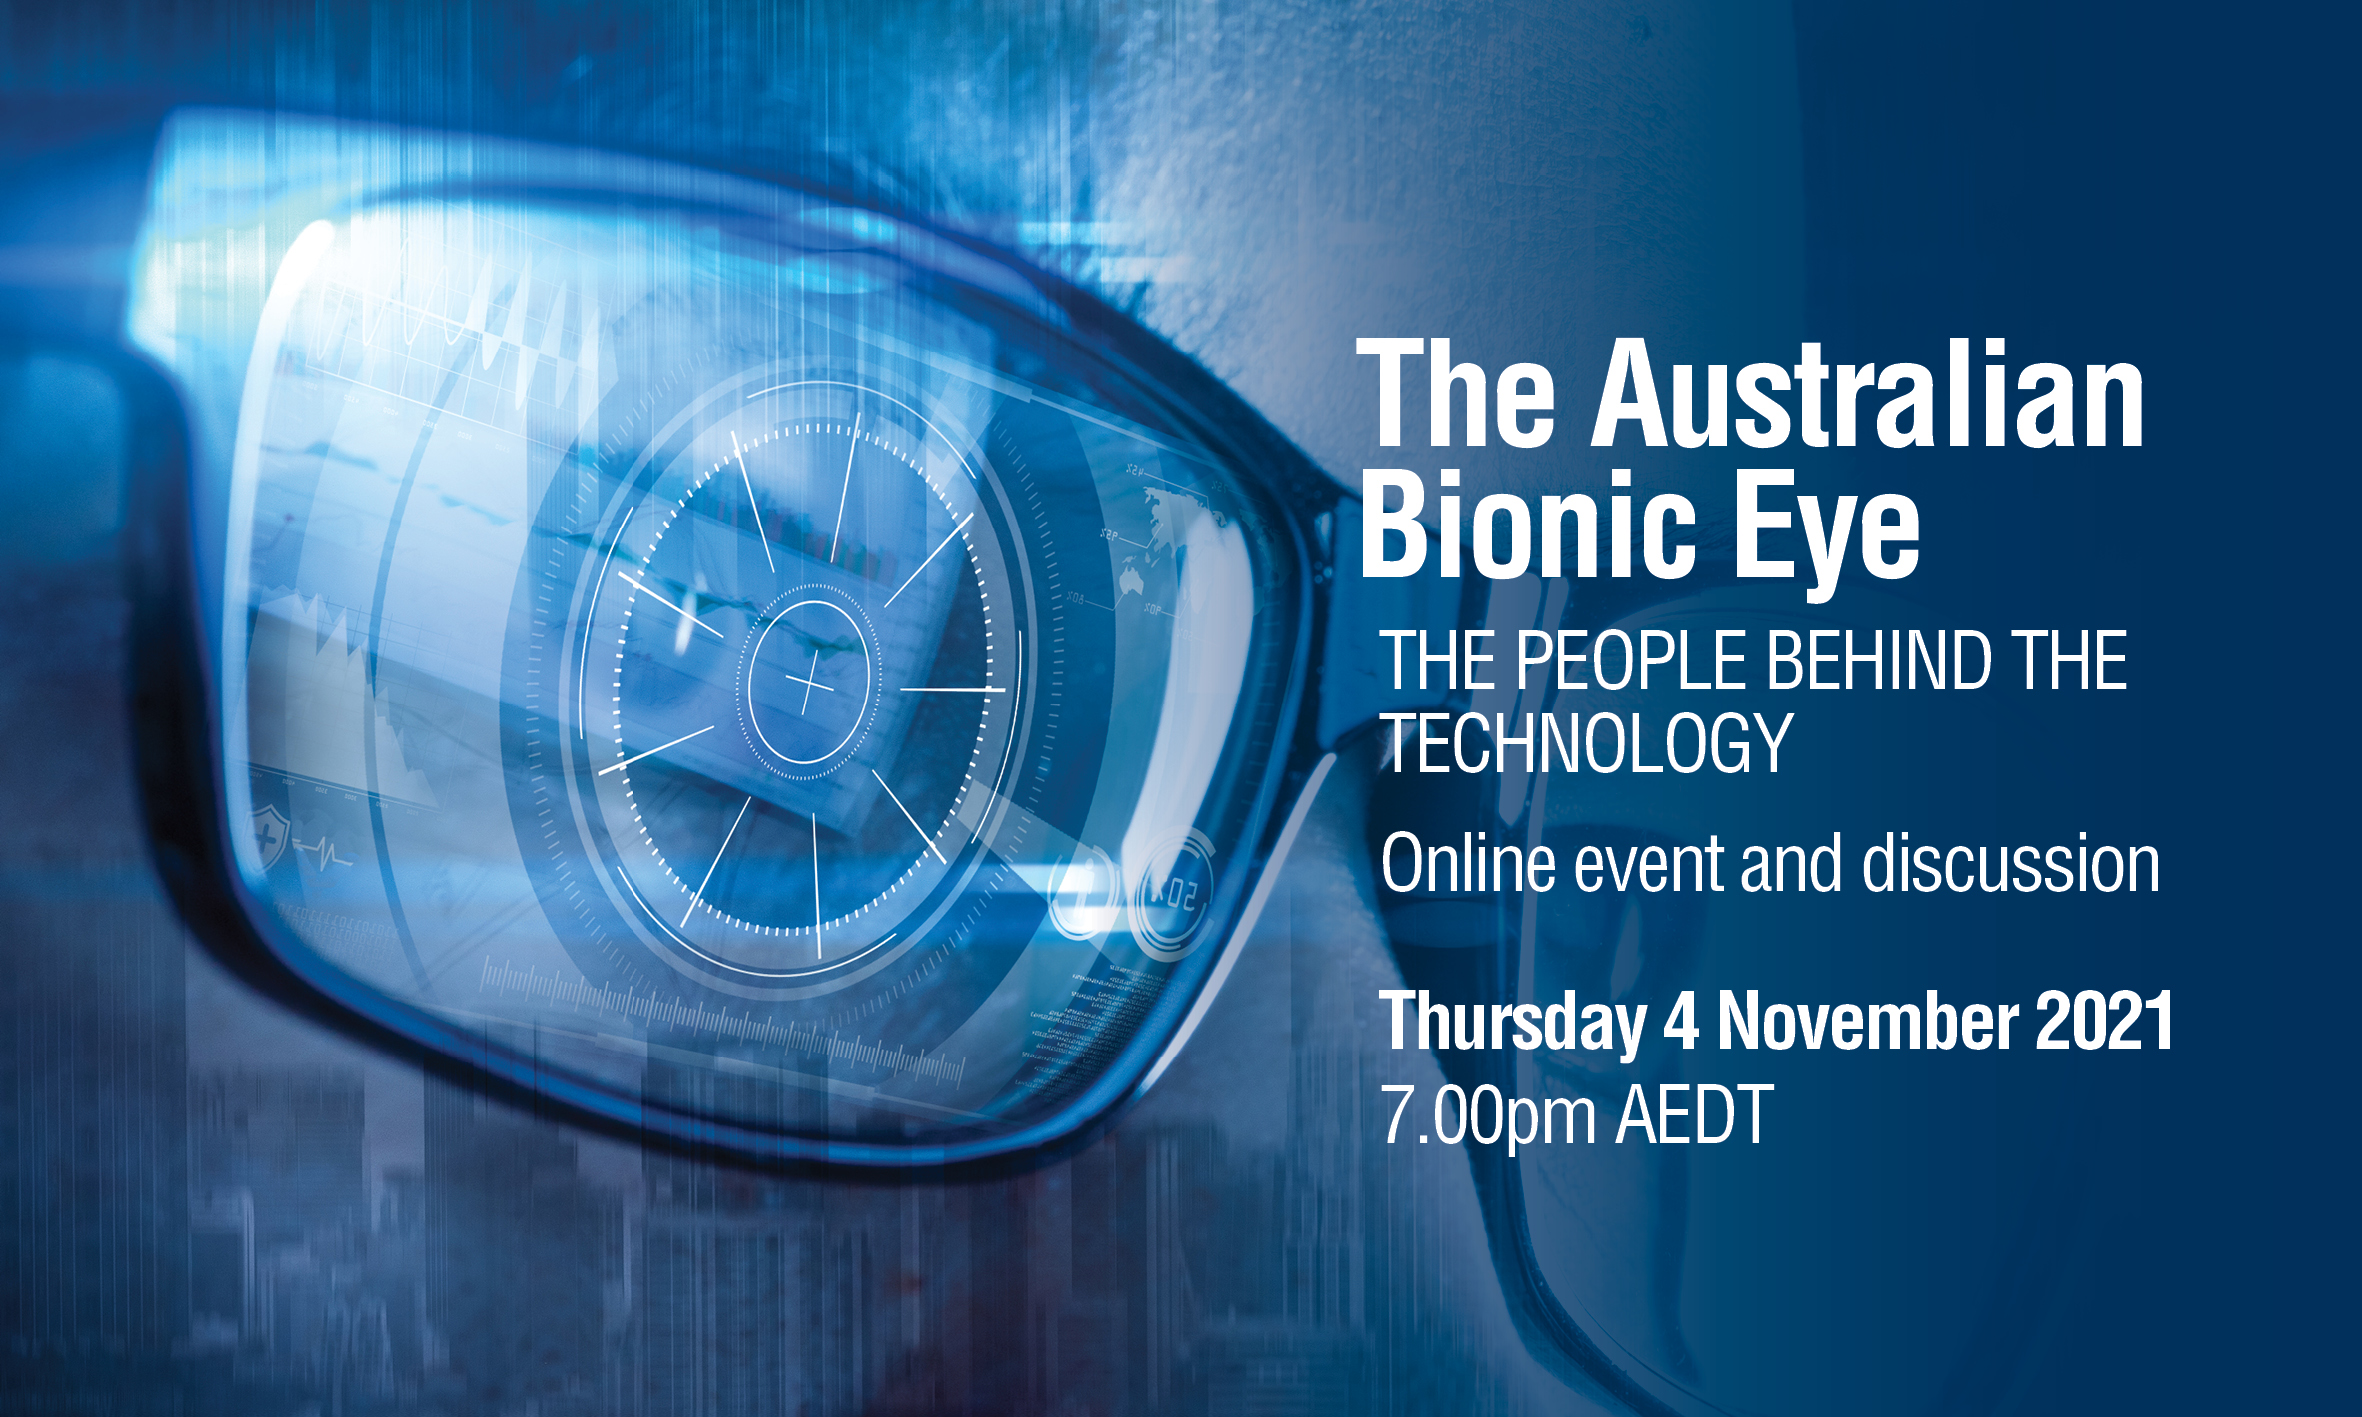 The Australian Bionic Eye the people behind the technology National